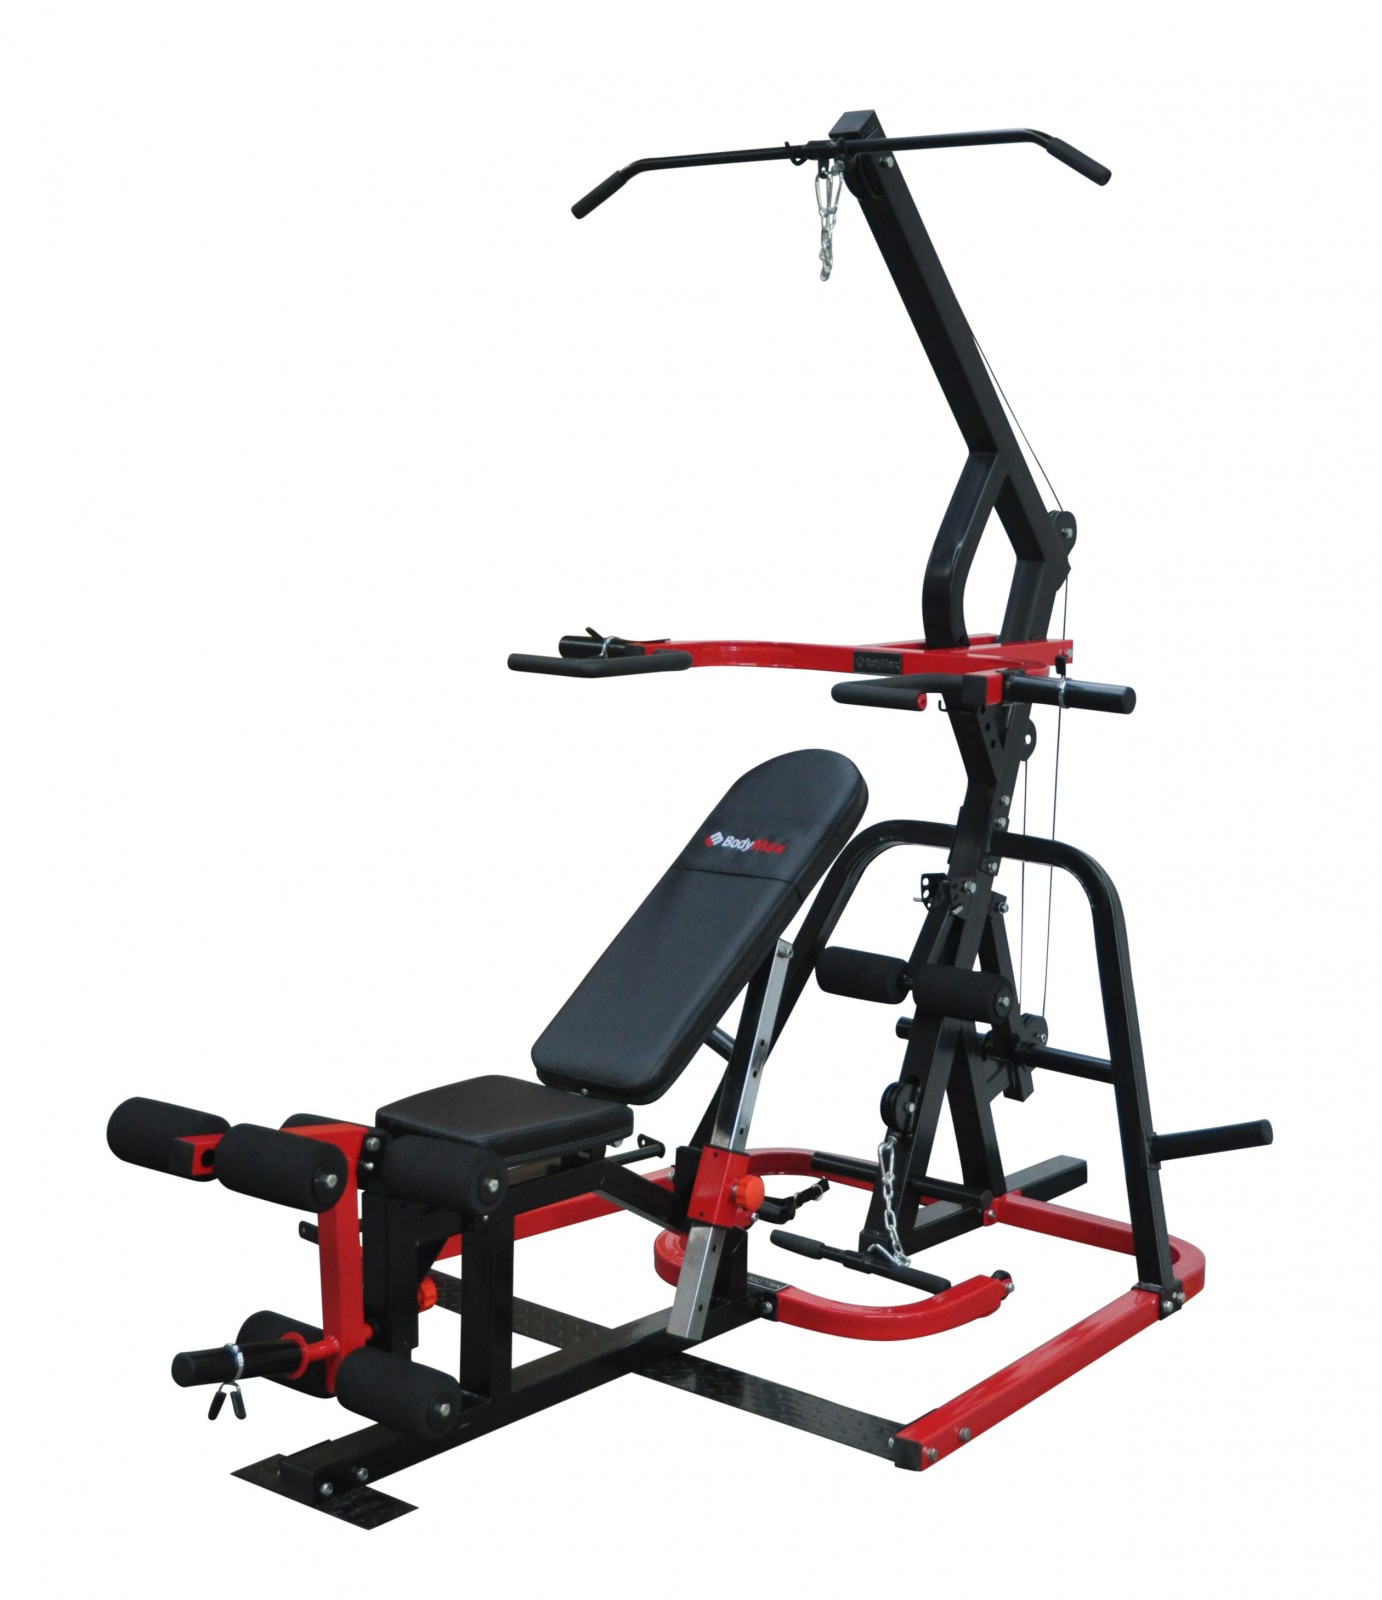 Ex-Display BodyMax CF500 Elite Leverage Gym With Bench and Preacher